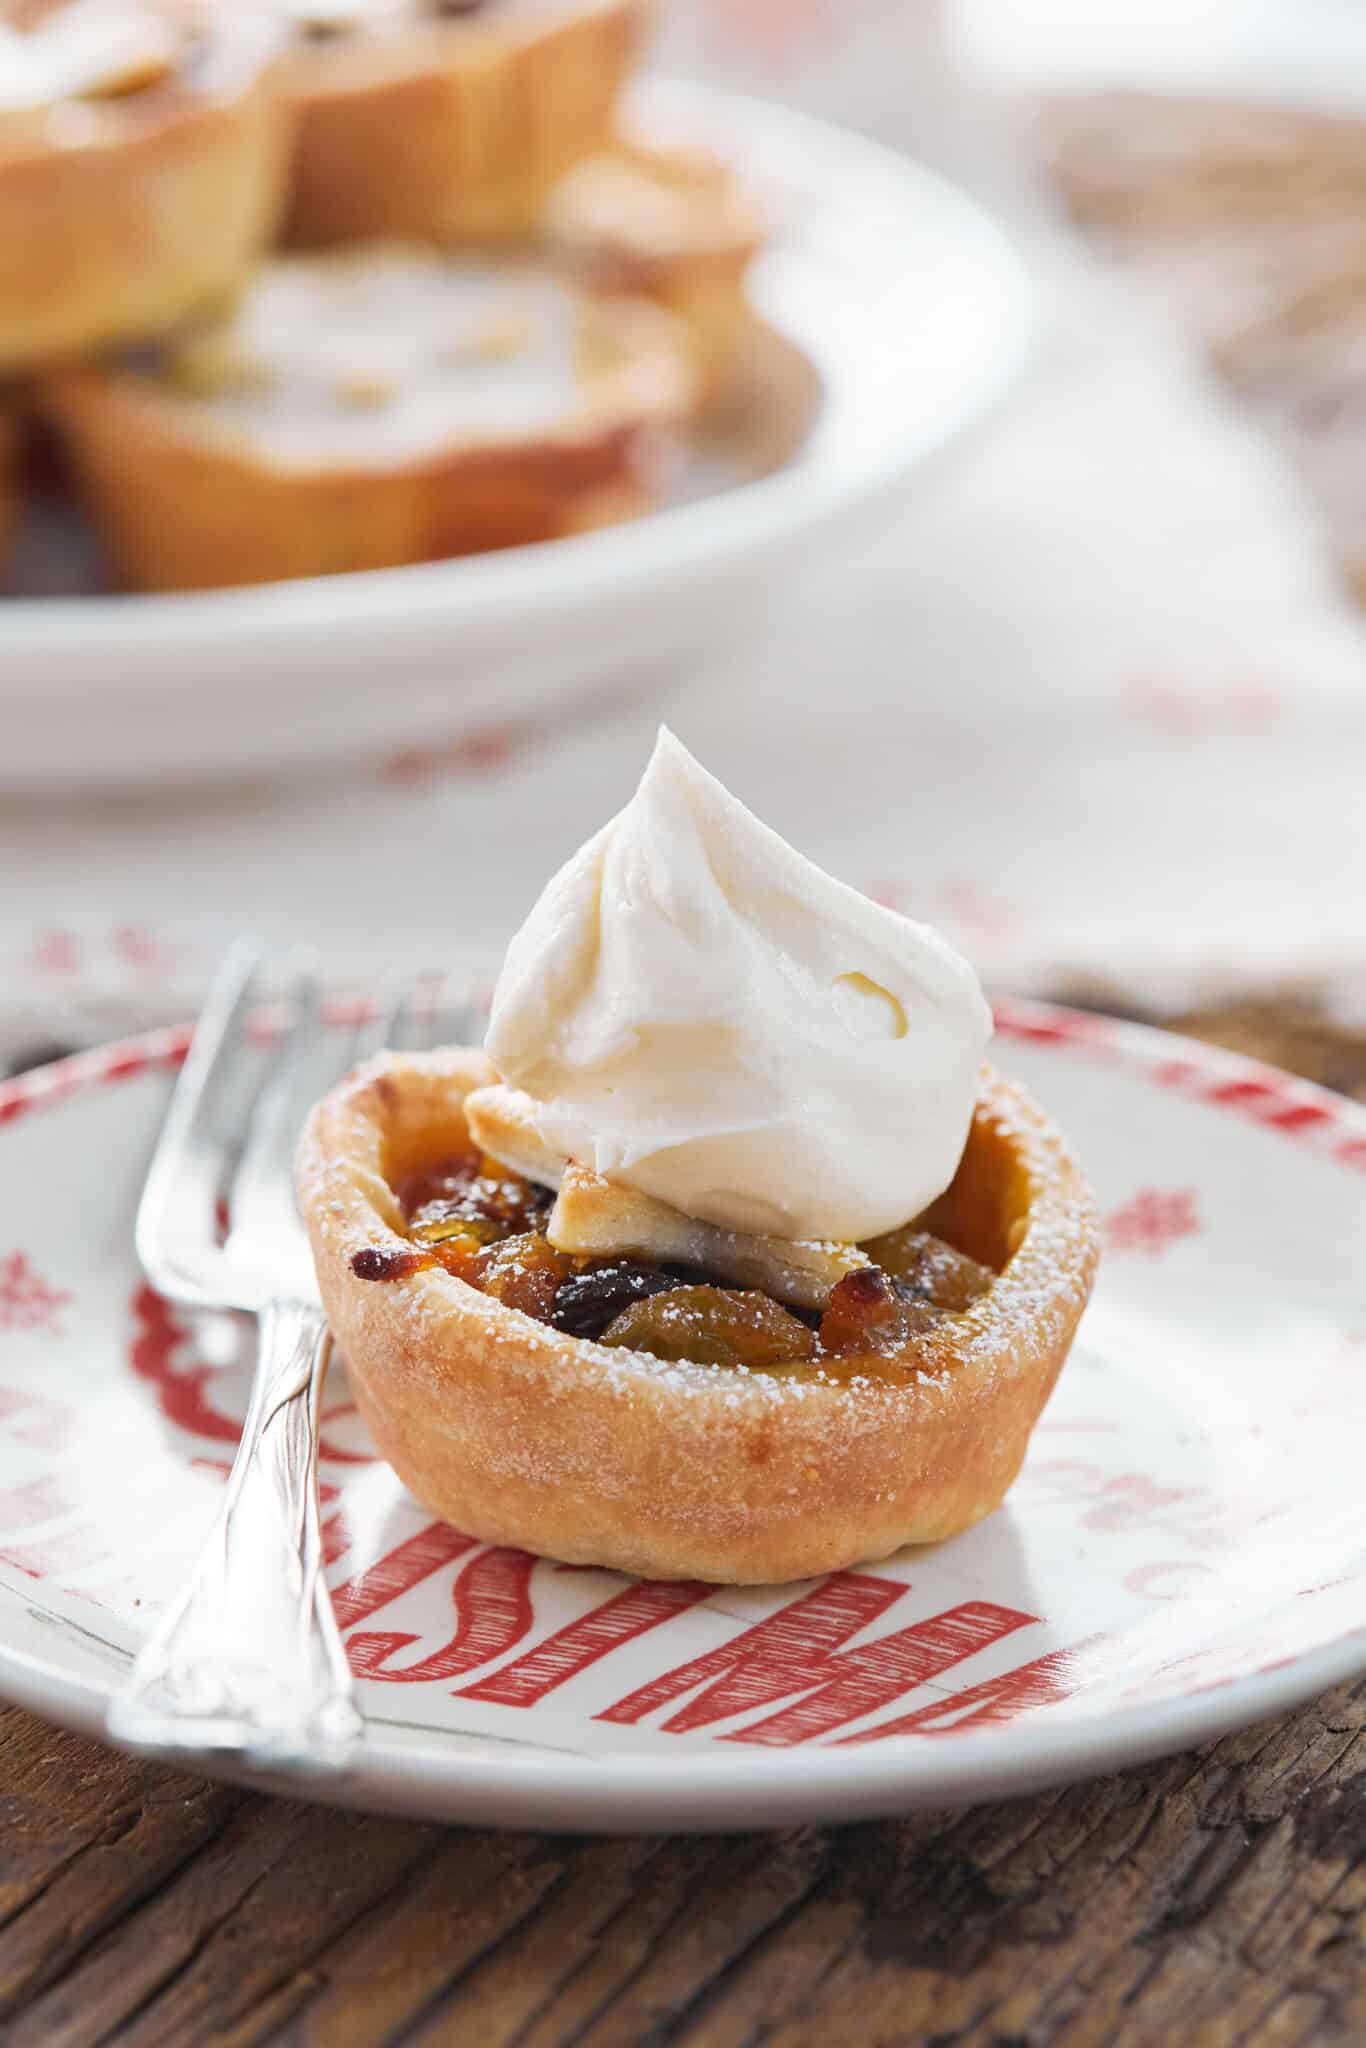 Serve Mince Pies: Sprinkle powdered sugar and serve warm with Brandy Butter or Whipped Cream.